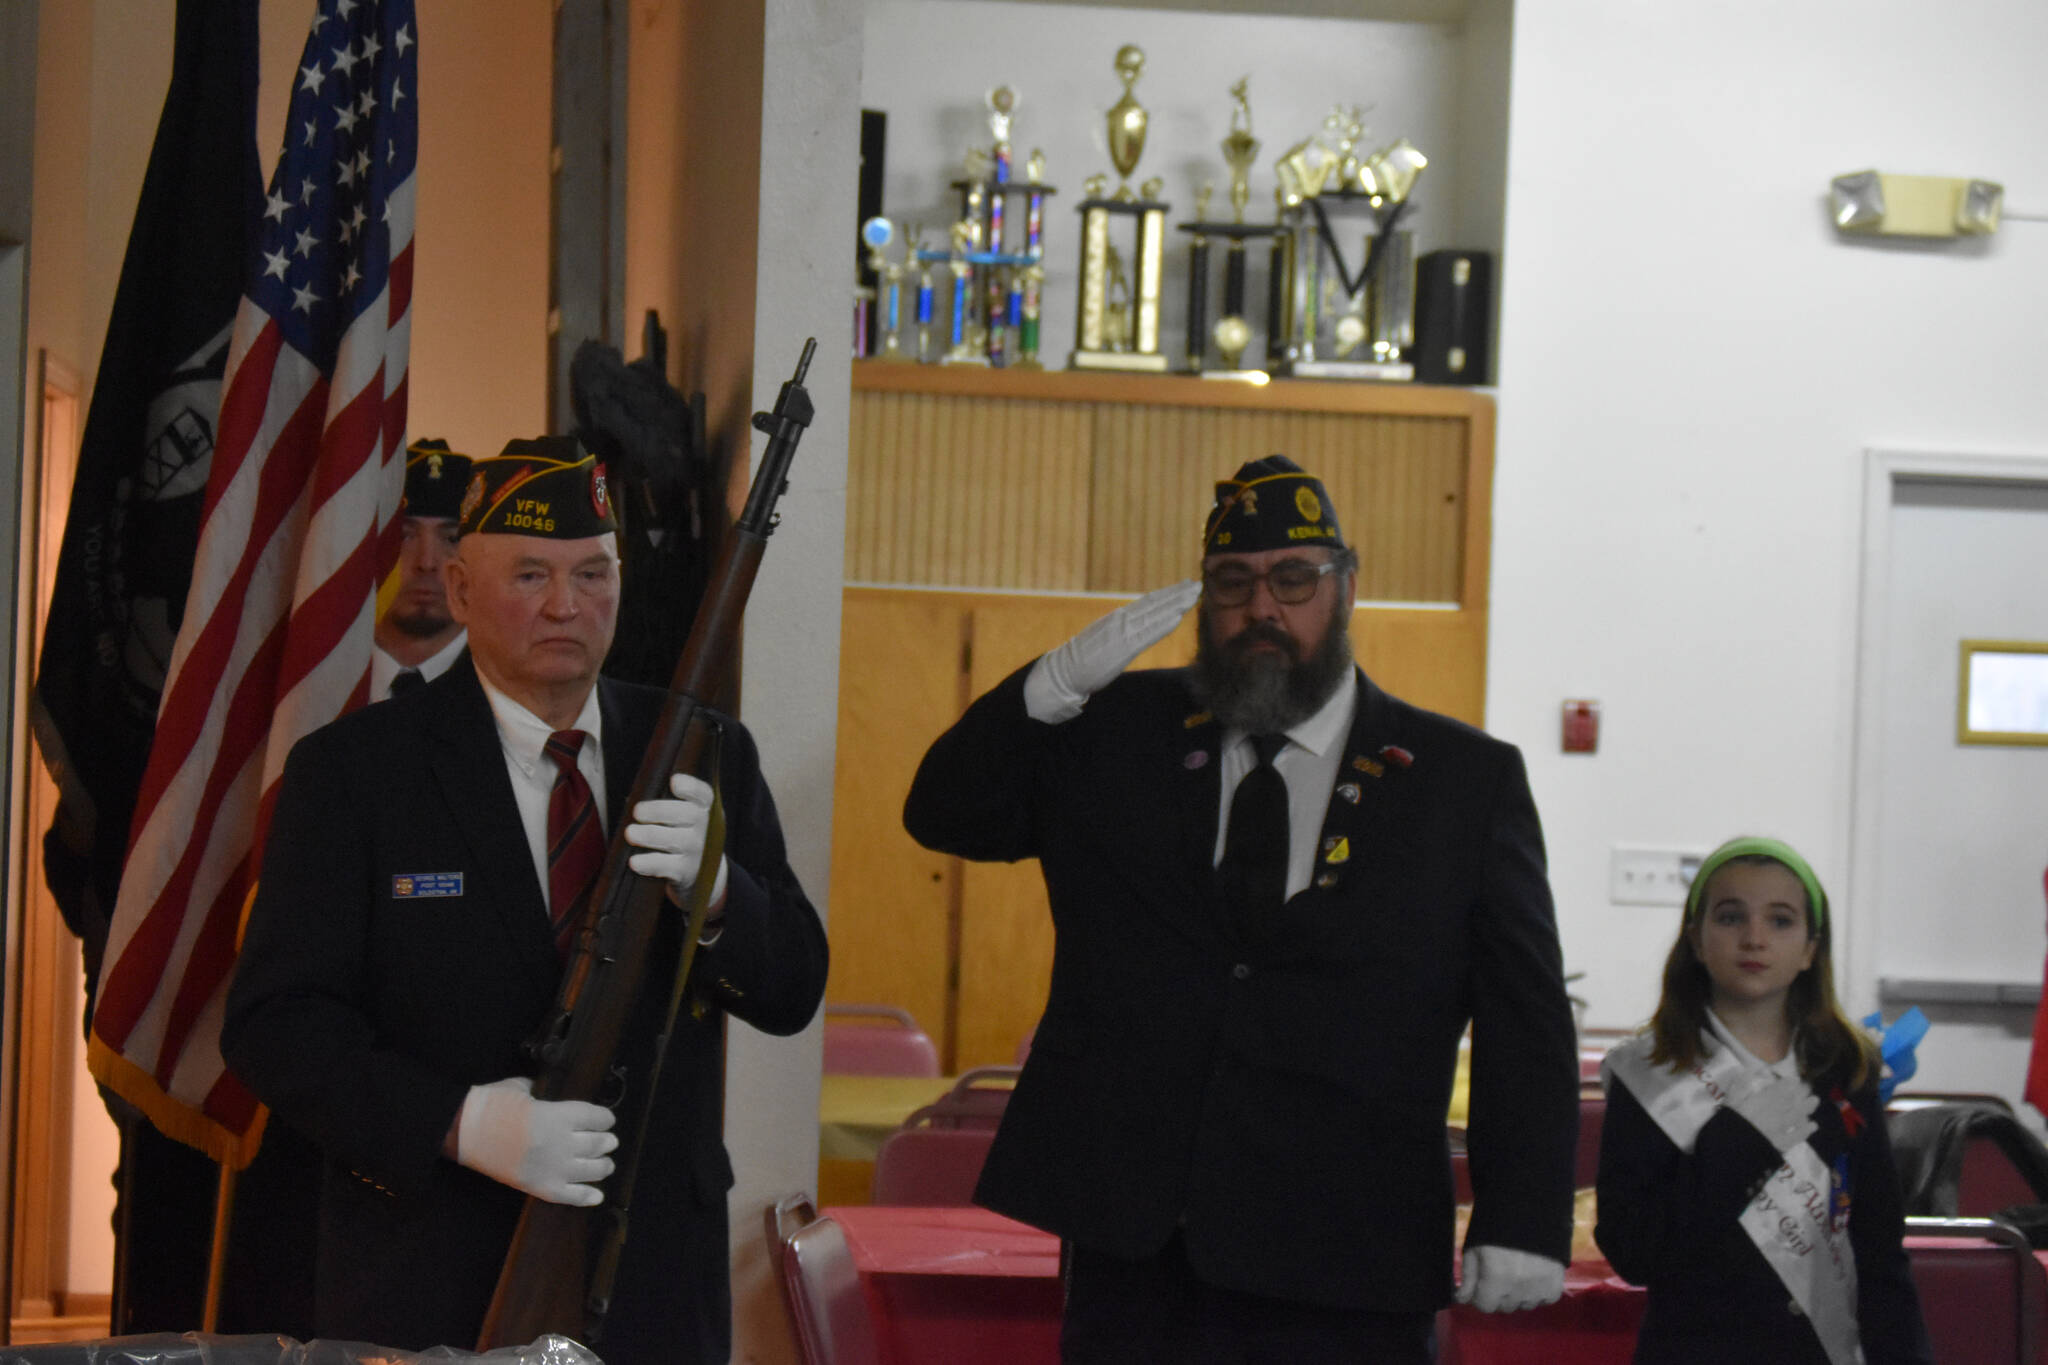 The honor guard begins their walk to present the colors at a celebration of Veterans Day at American Legion Post 20 in Kenai, Alaska, on Friday, Nov. 11, 2022. (Jake Dye/Peninsula Clarion)